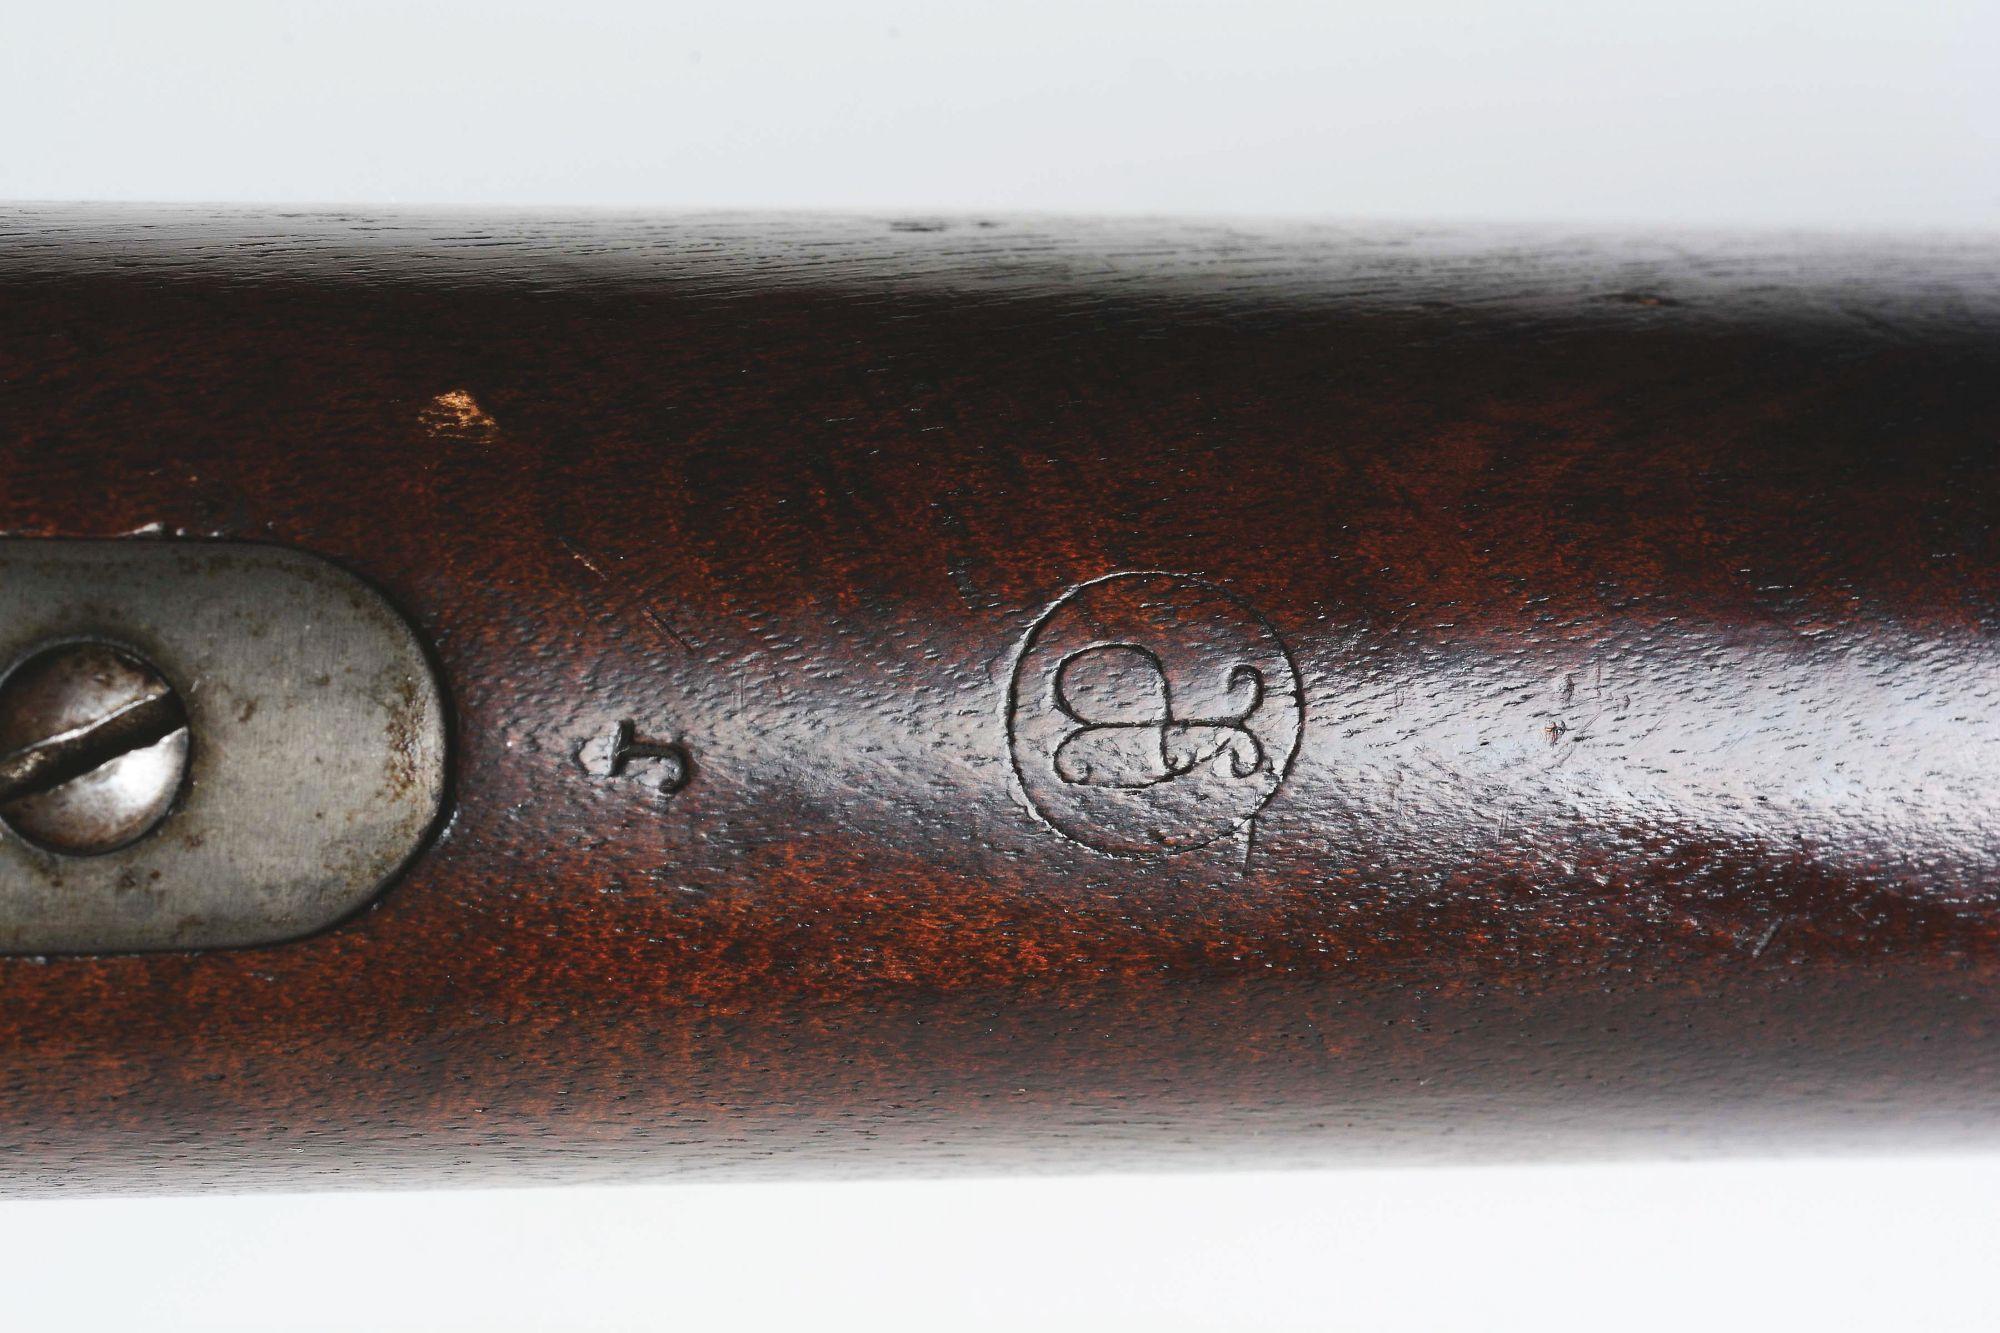 (A) MODEL 1882 US MAGAZINE RIFLE SPRINGFIELD CHAFFEE-REESE BOLT-ACTION RIFLE.